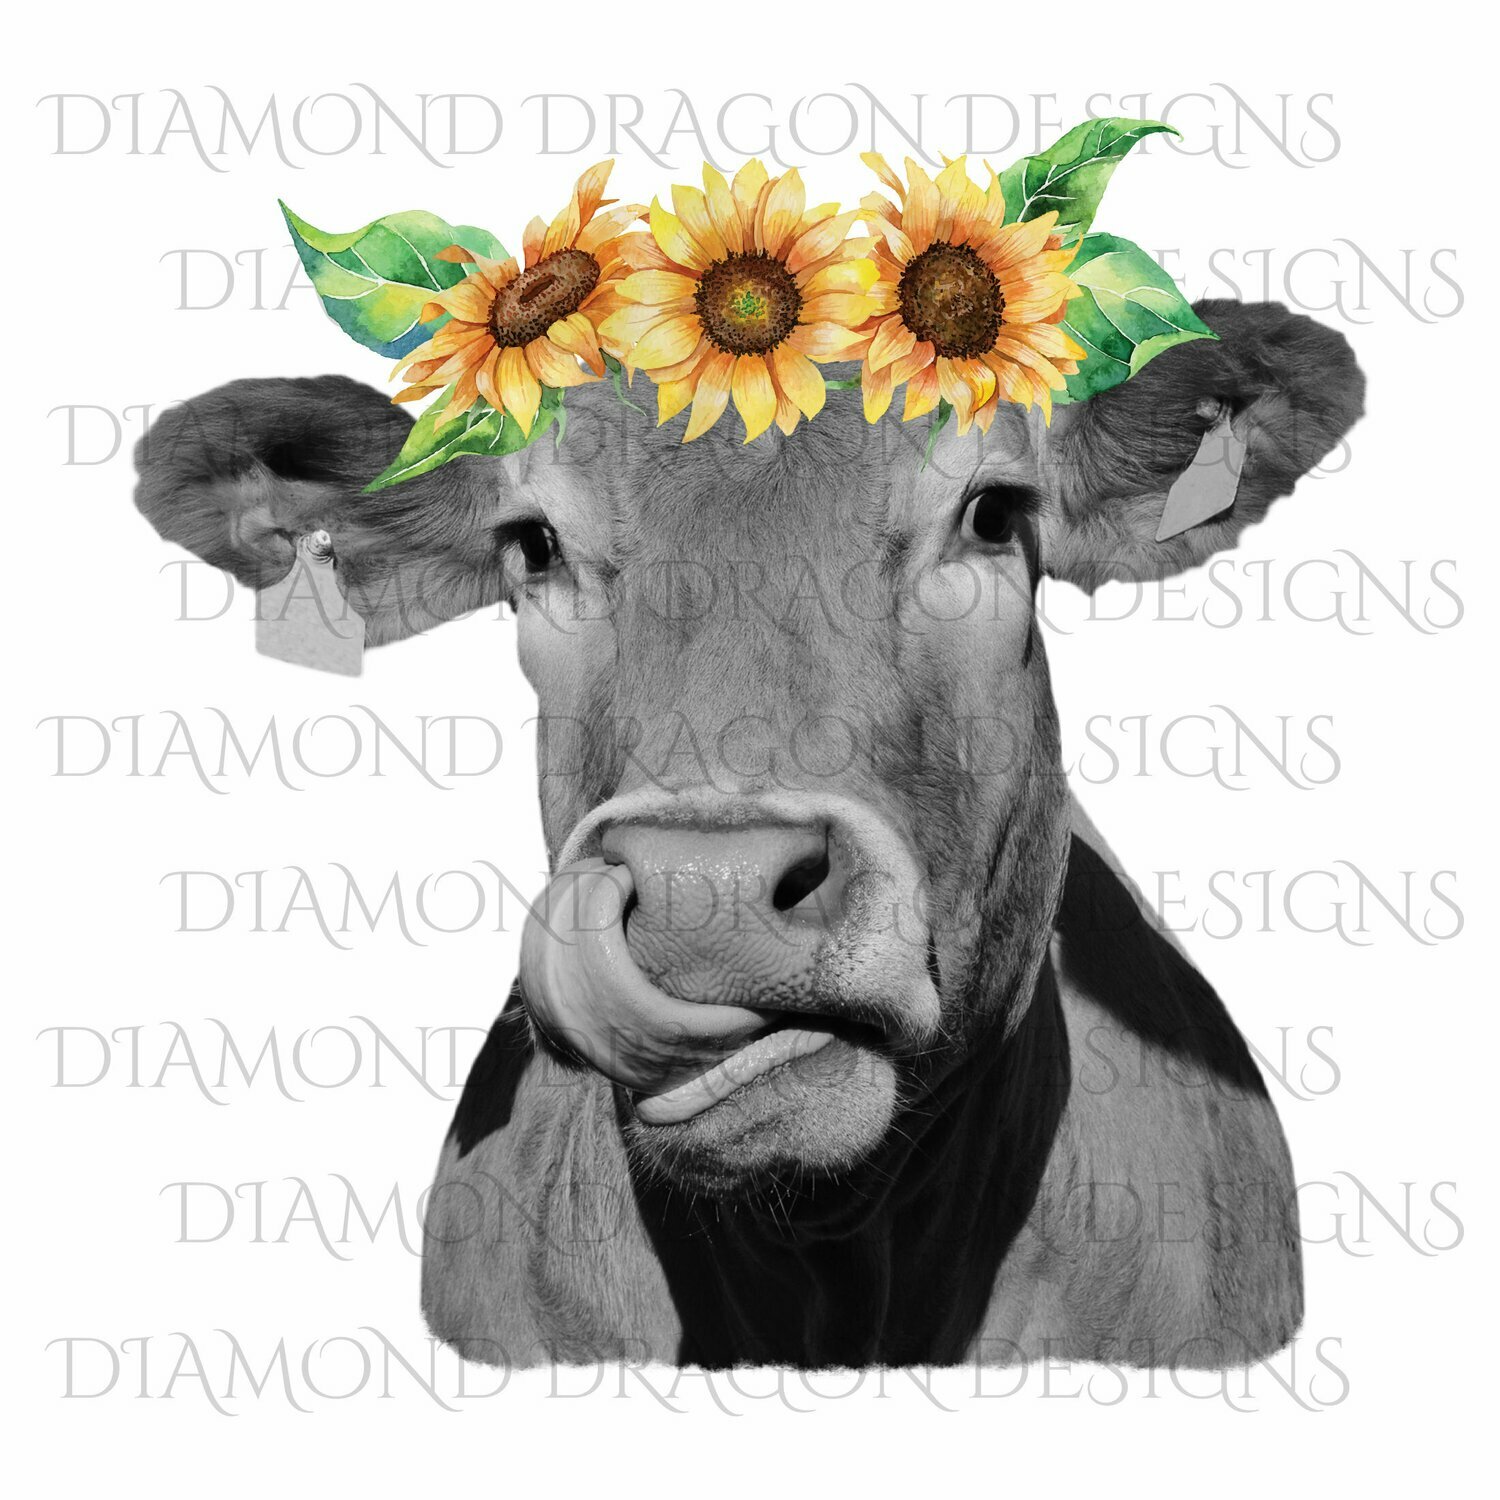 Cows - Heifer, Cute Cow, Sunflower Crown, Cowlick, Cow Tongue Out,High Quality, Digital Image